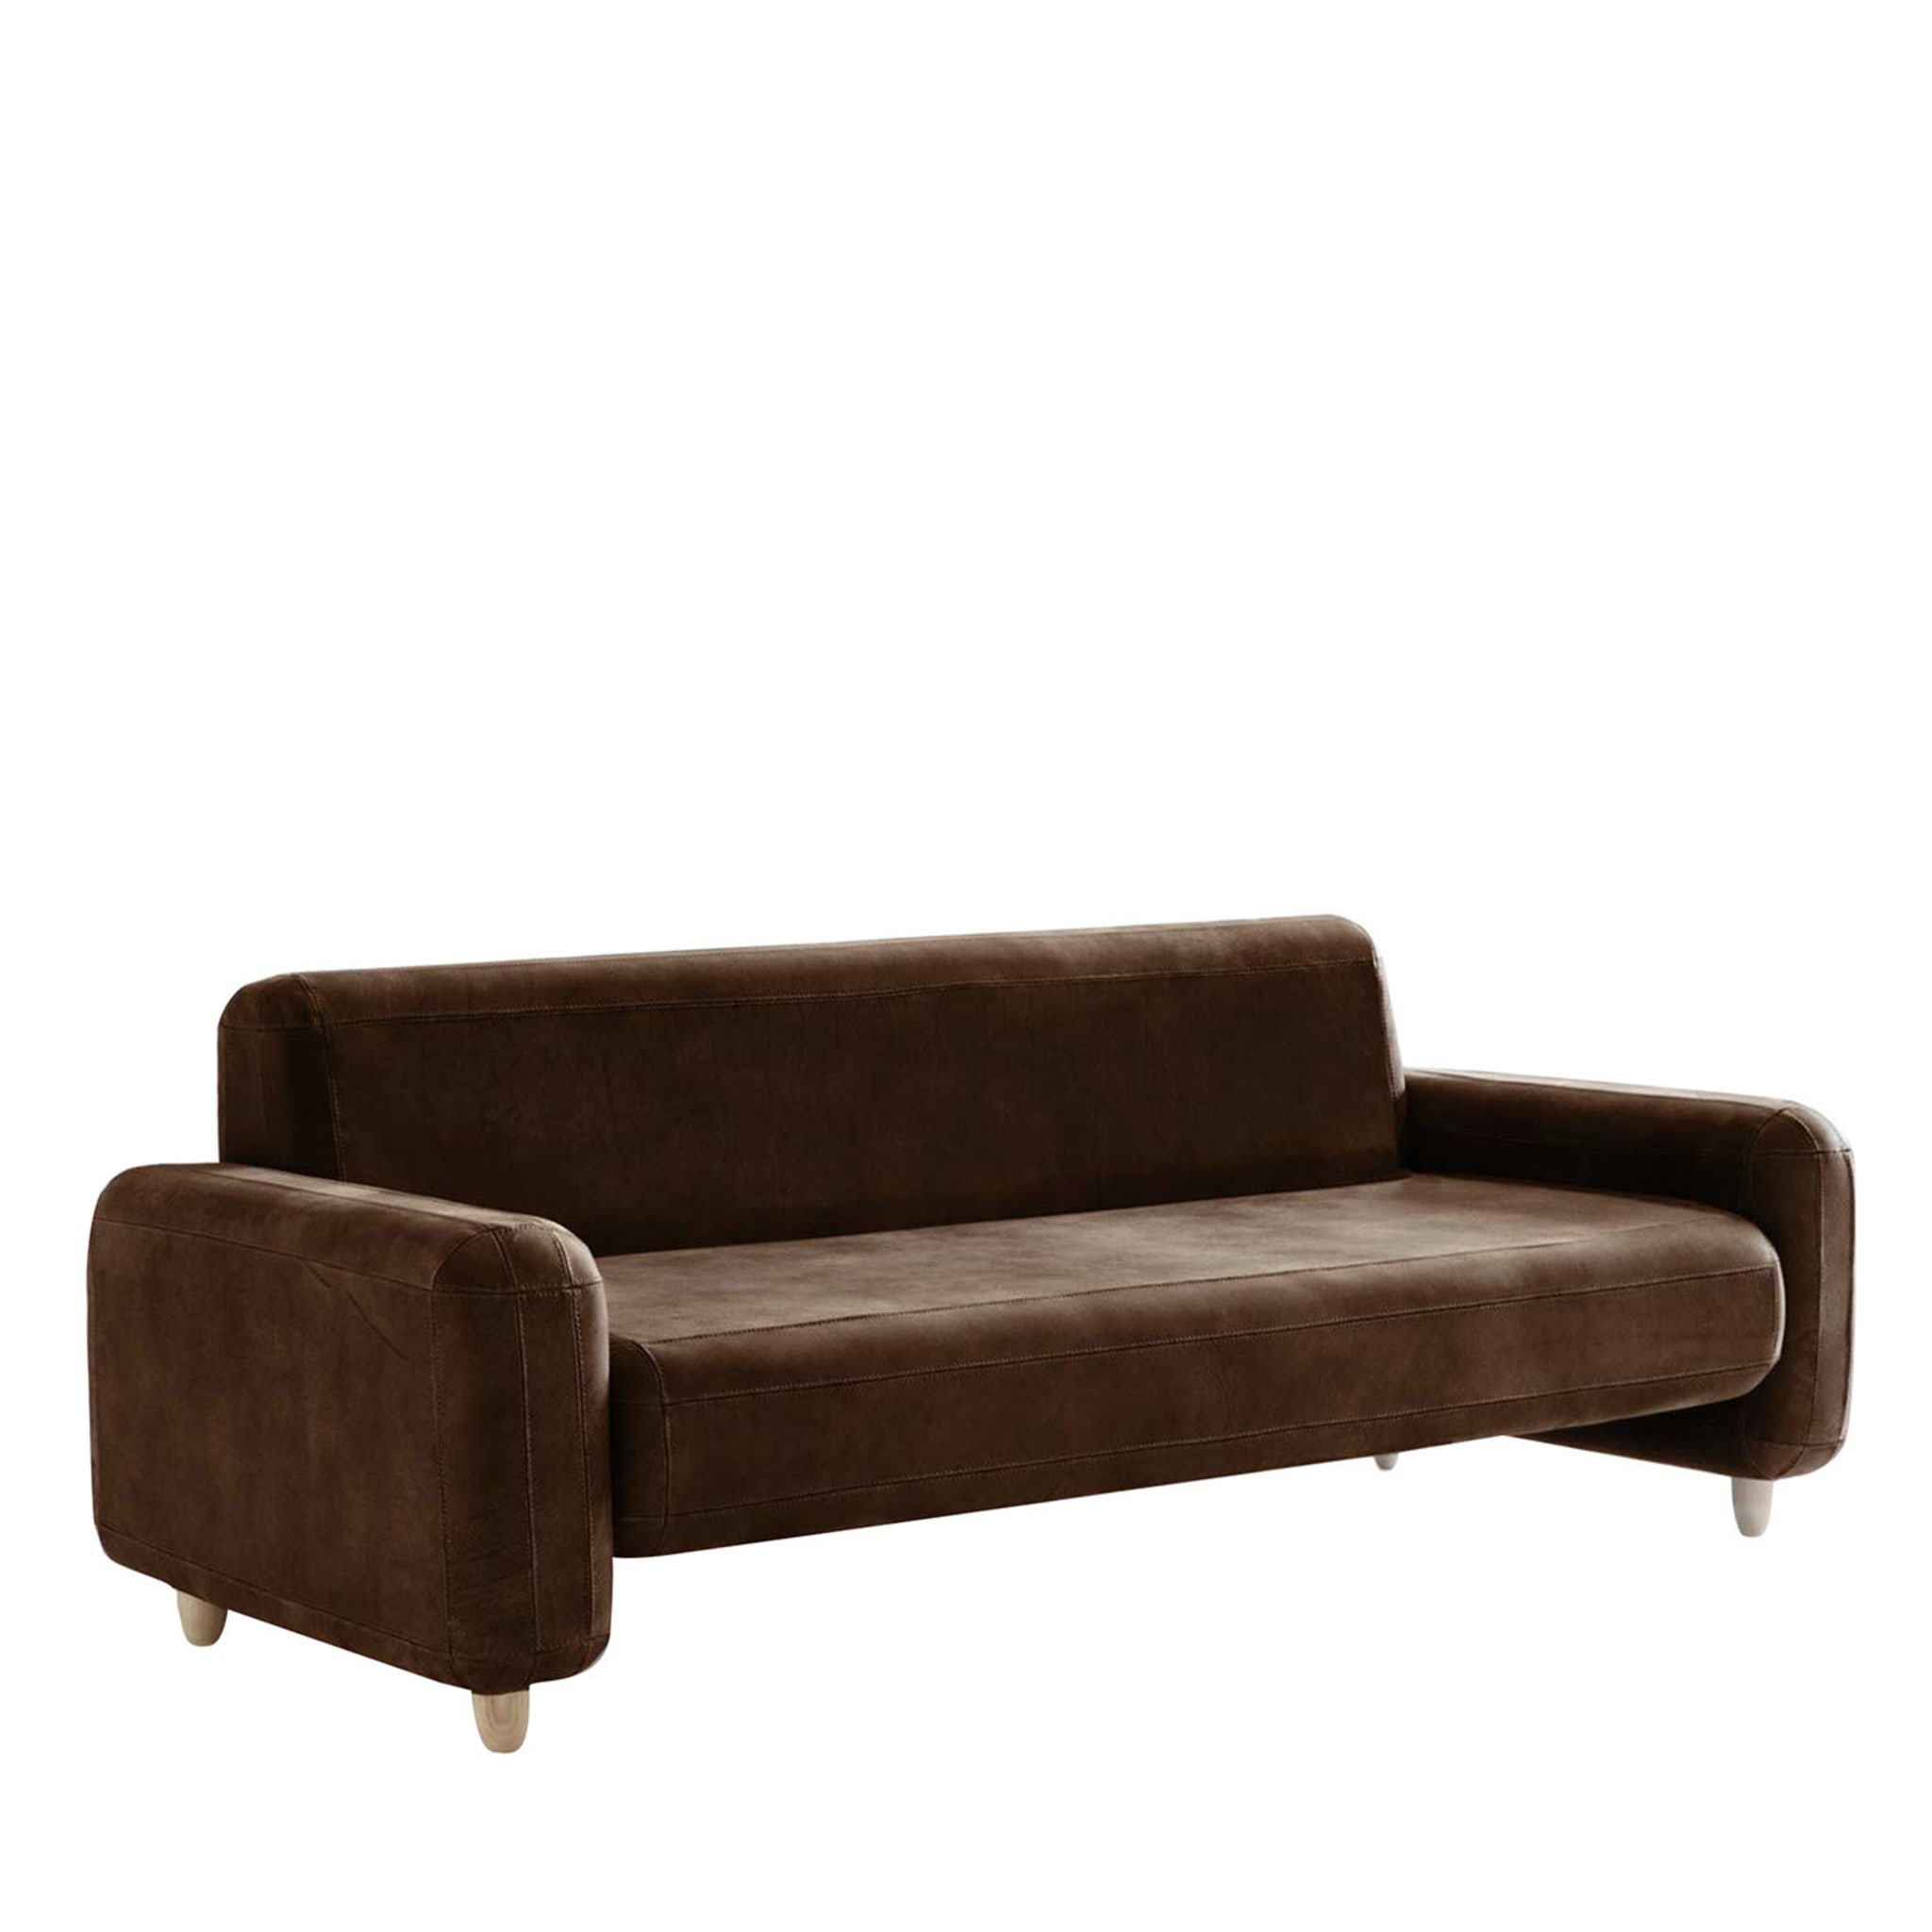 Traco Natural Brown Sofa by Paolo Cappello - Main view